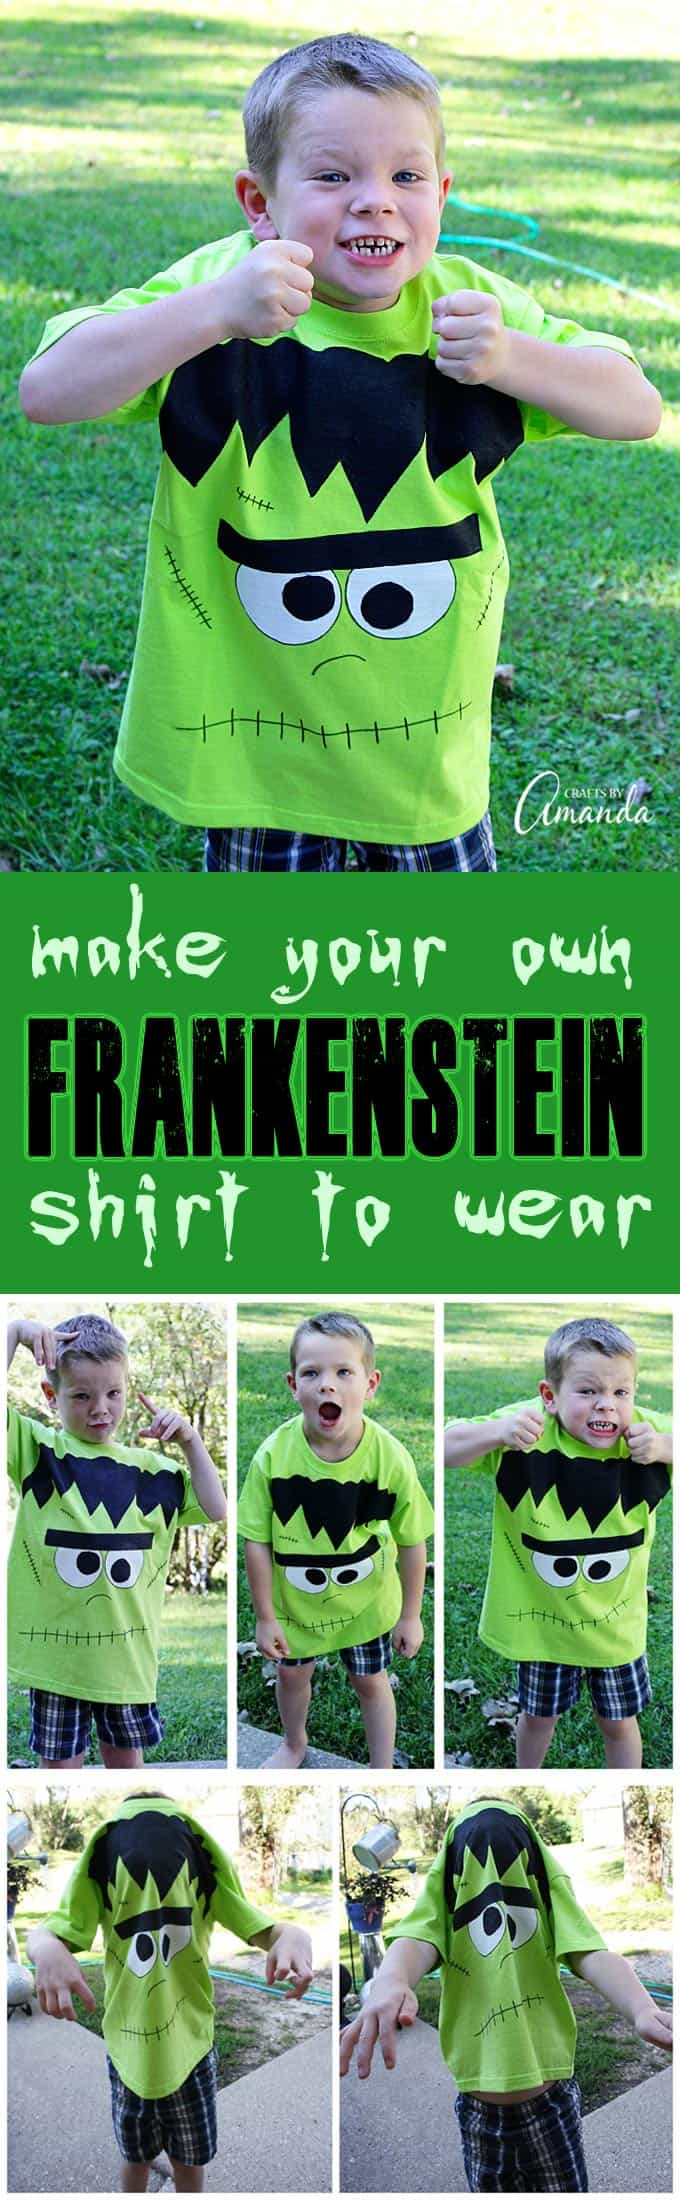 This Frankenstein shirt is perfect for your favorite little monster to wear on Halloween, or any time!